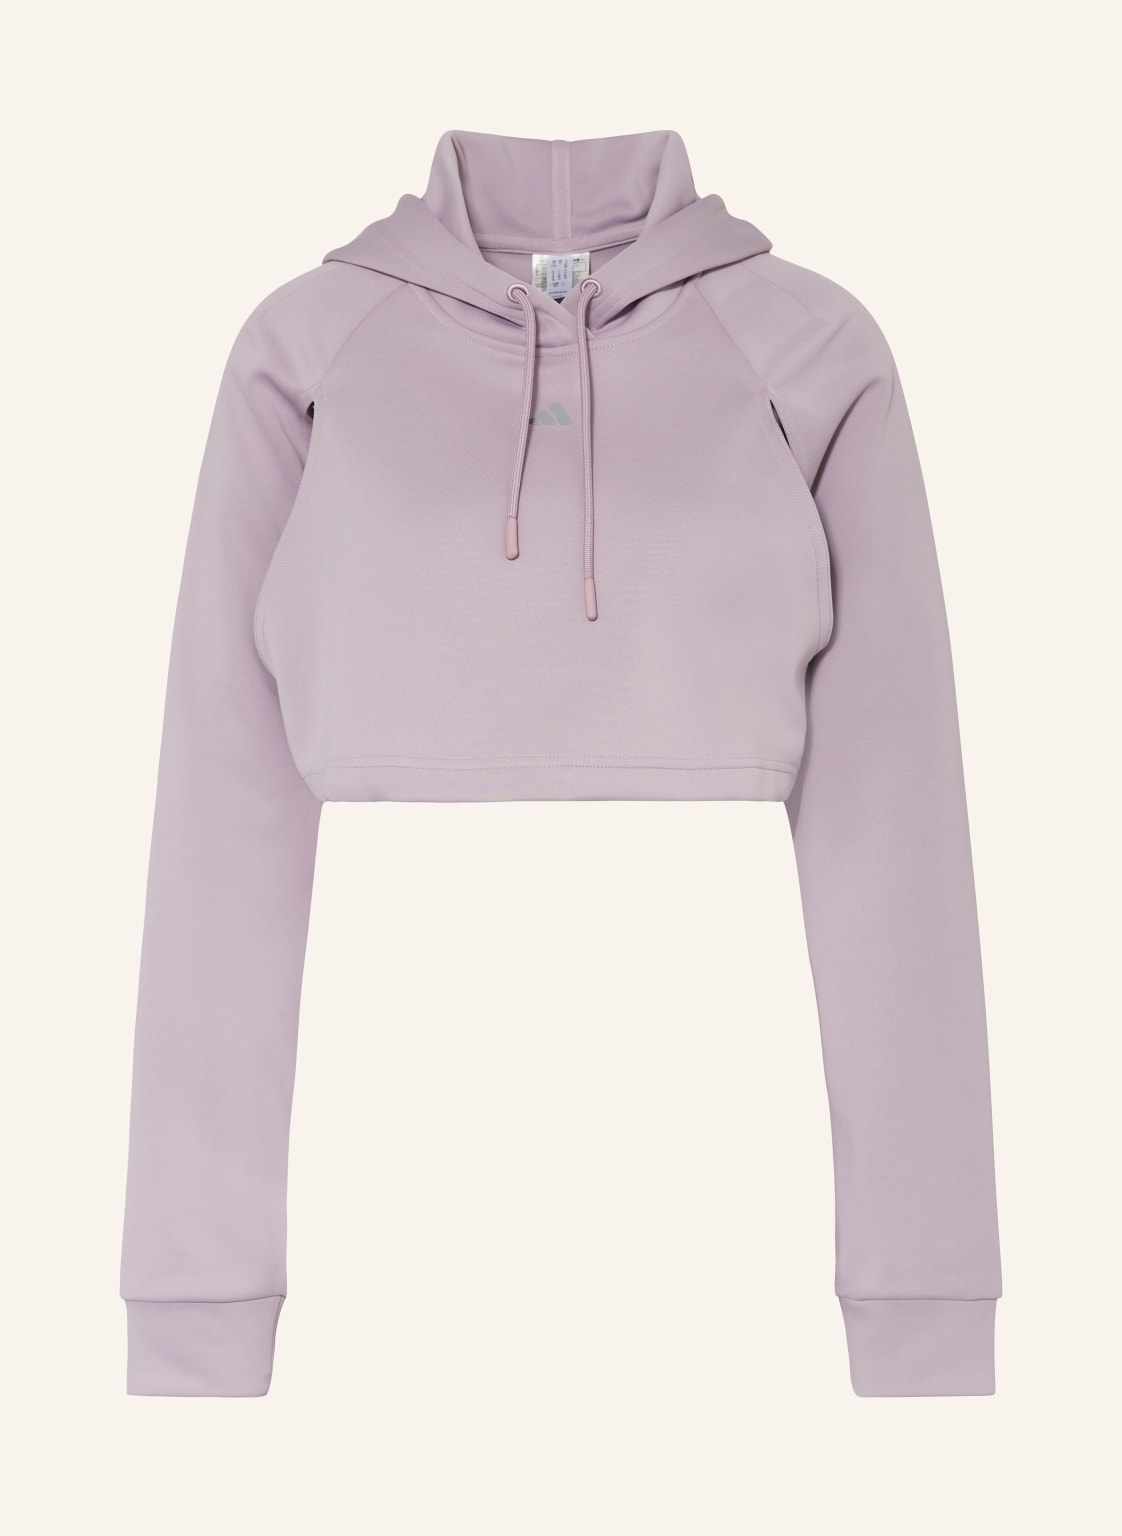 Adidas Cropped-Hoodie Hiit Aeroready Mit Cut-Outs lila von Adidas